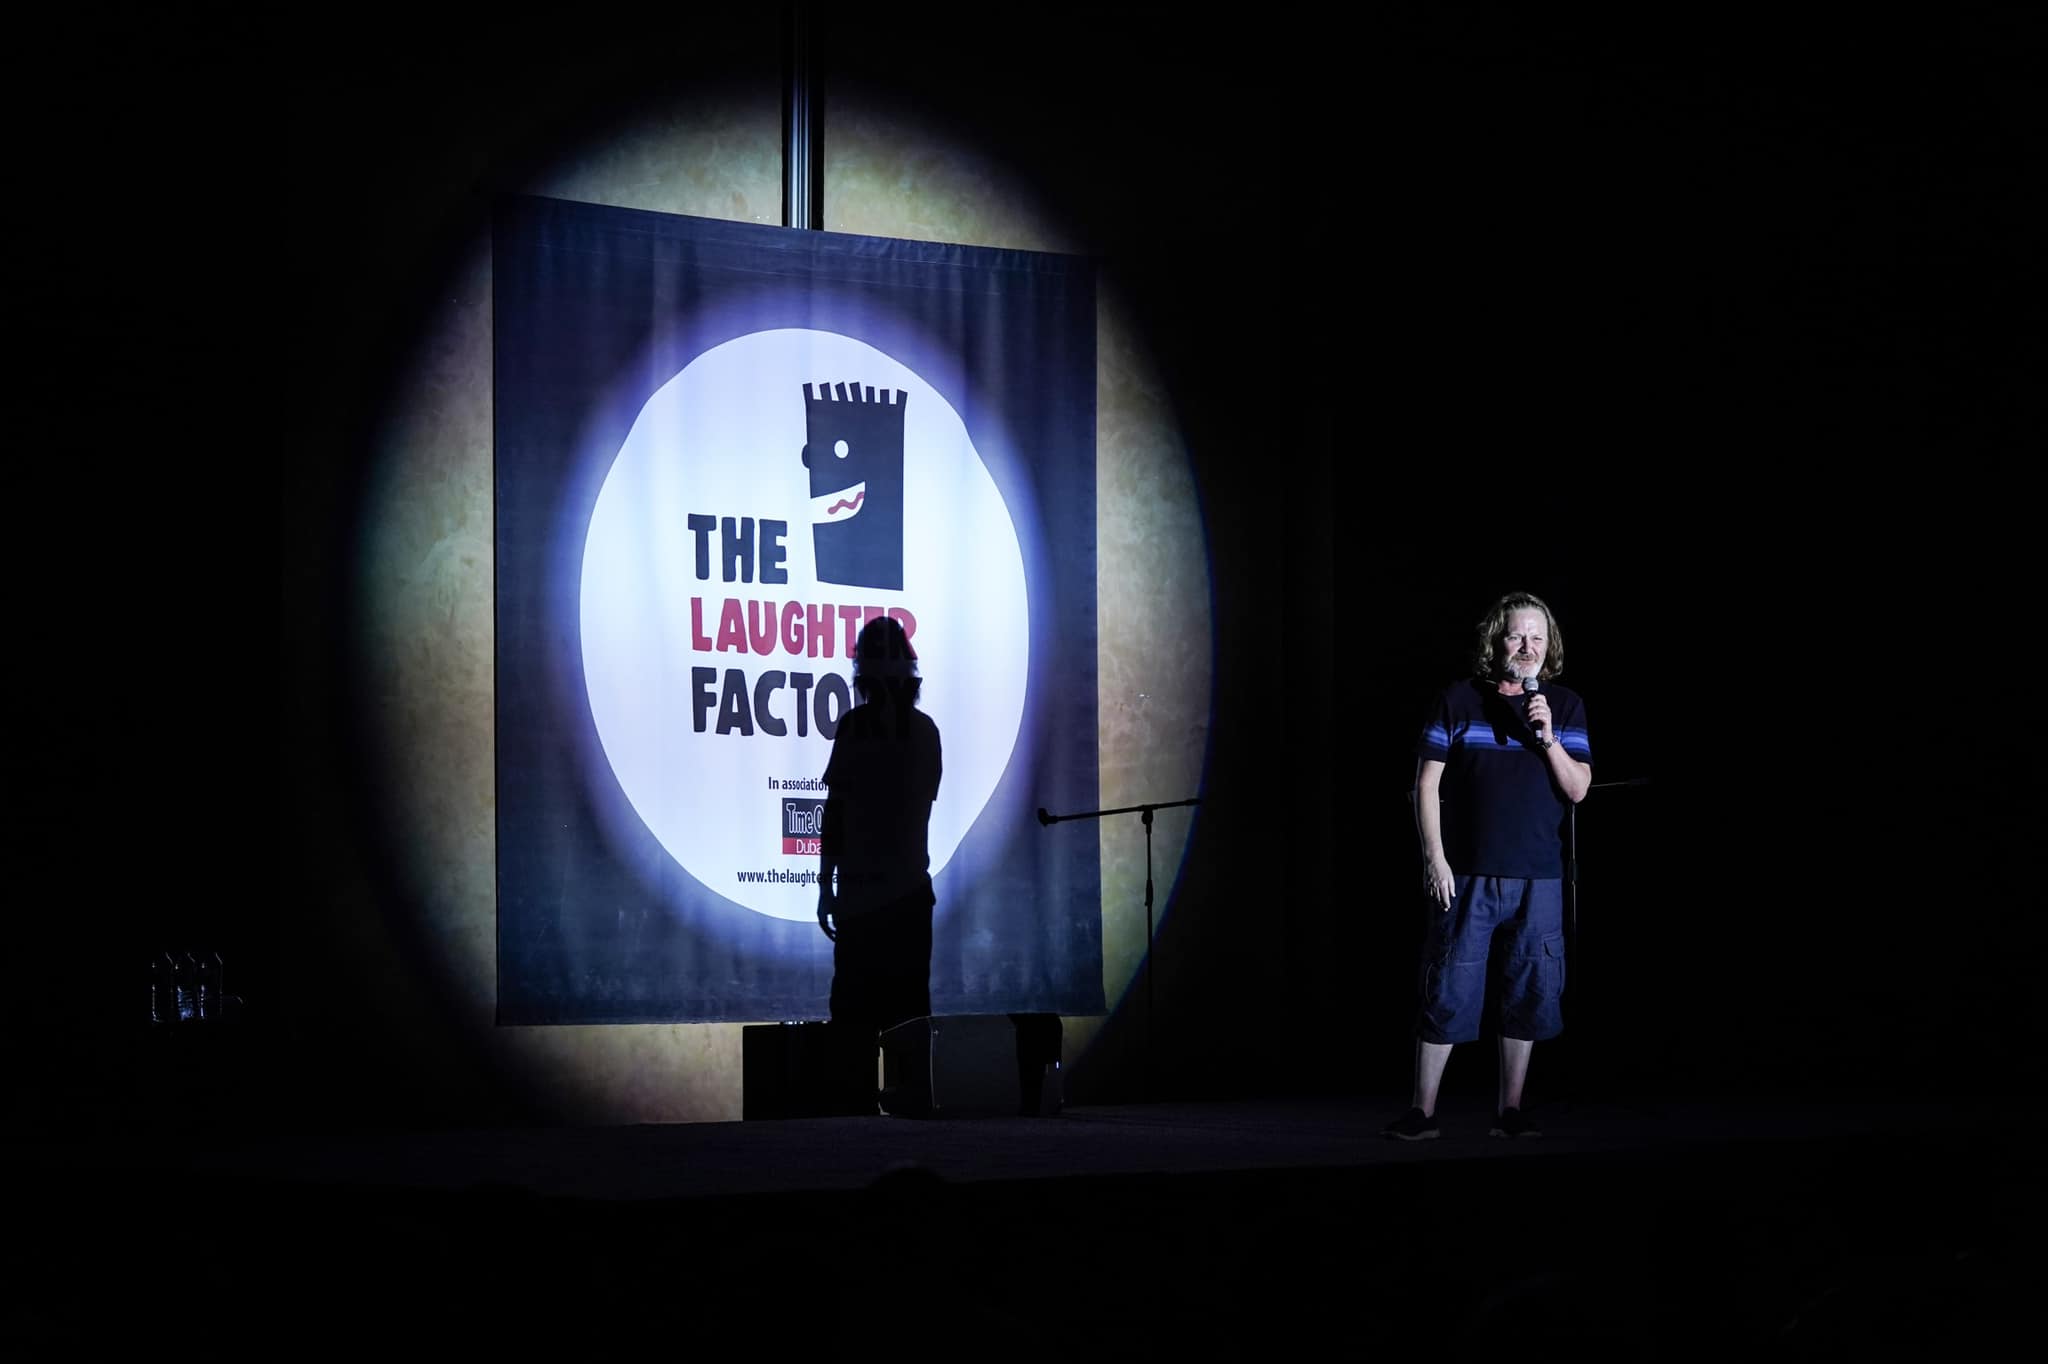 The Laughter Factory show was held in Erbil.